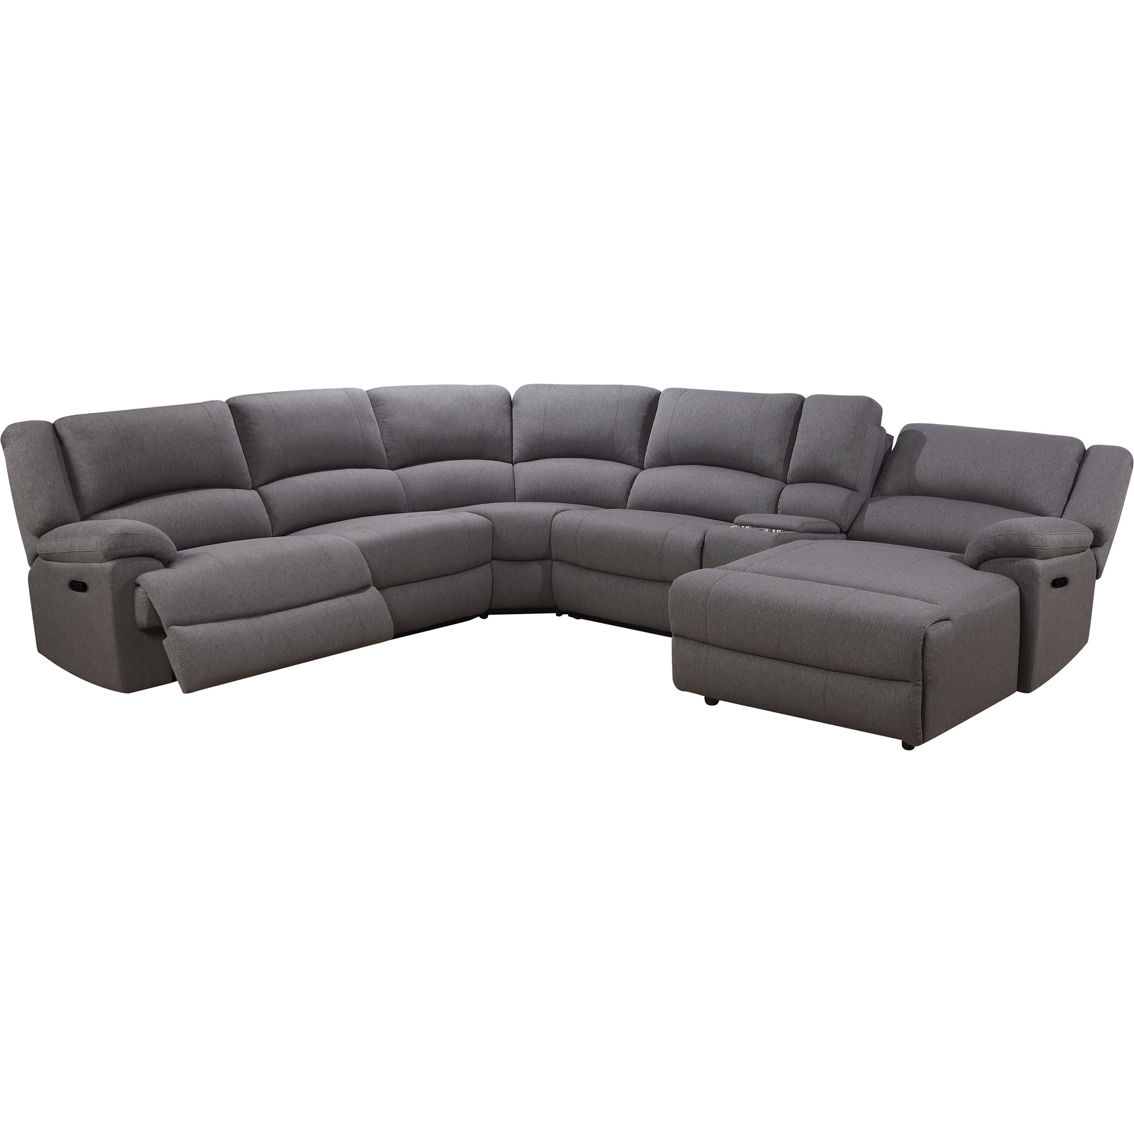 Abbyson Fletcher Stain Resistant Fabric Reclining Sectional 6 pc. Set, Gray - Image 4 of 9